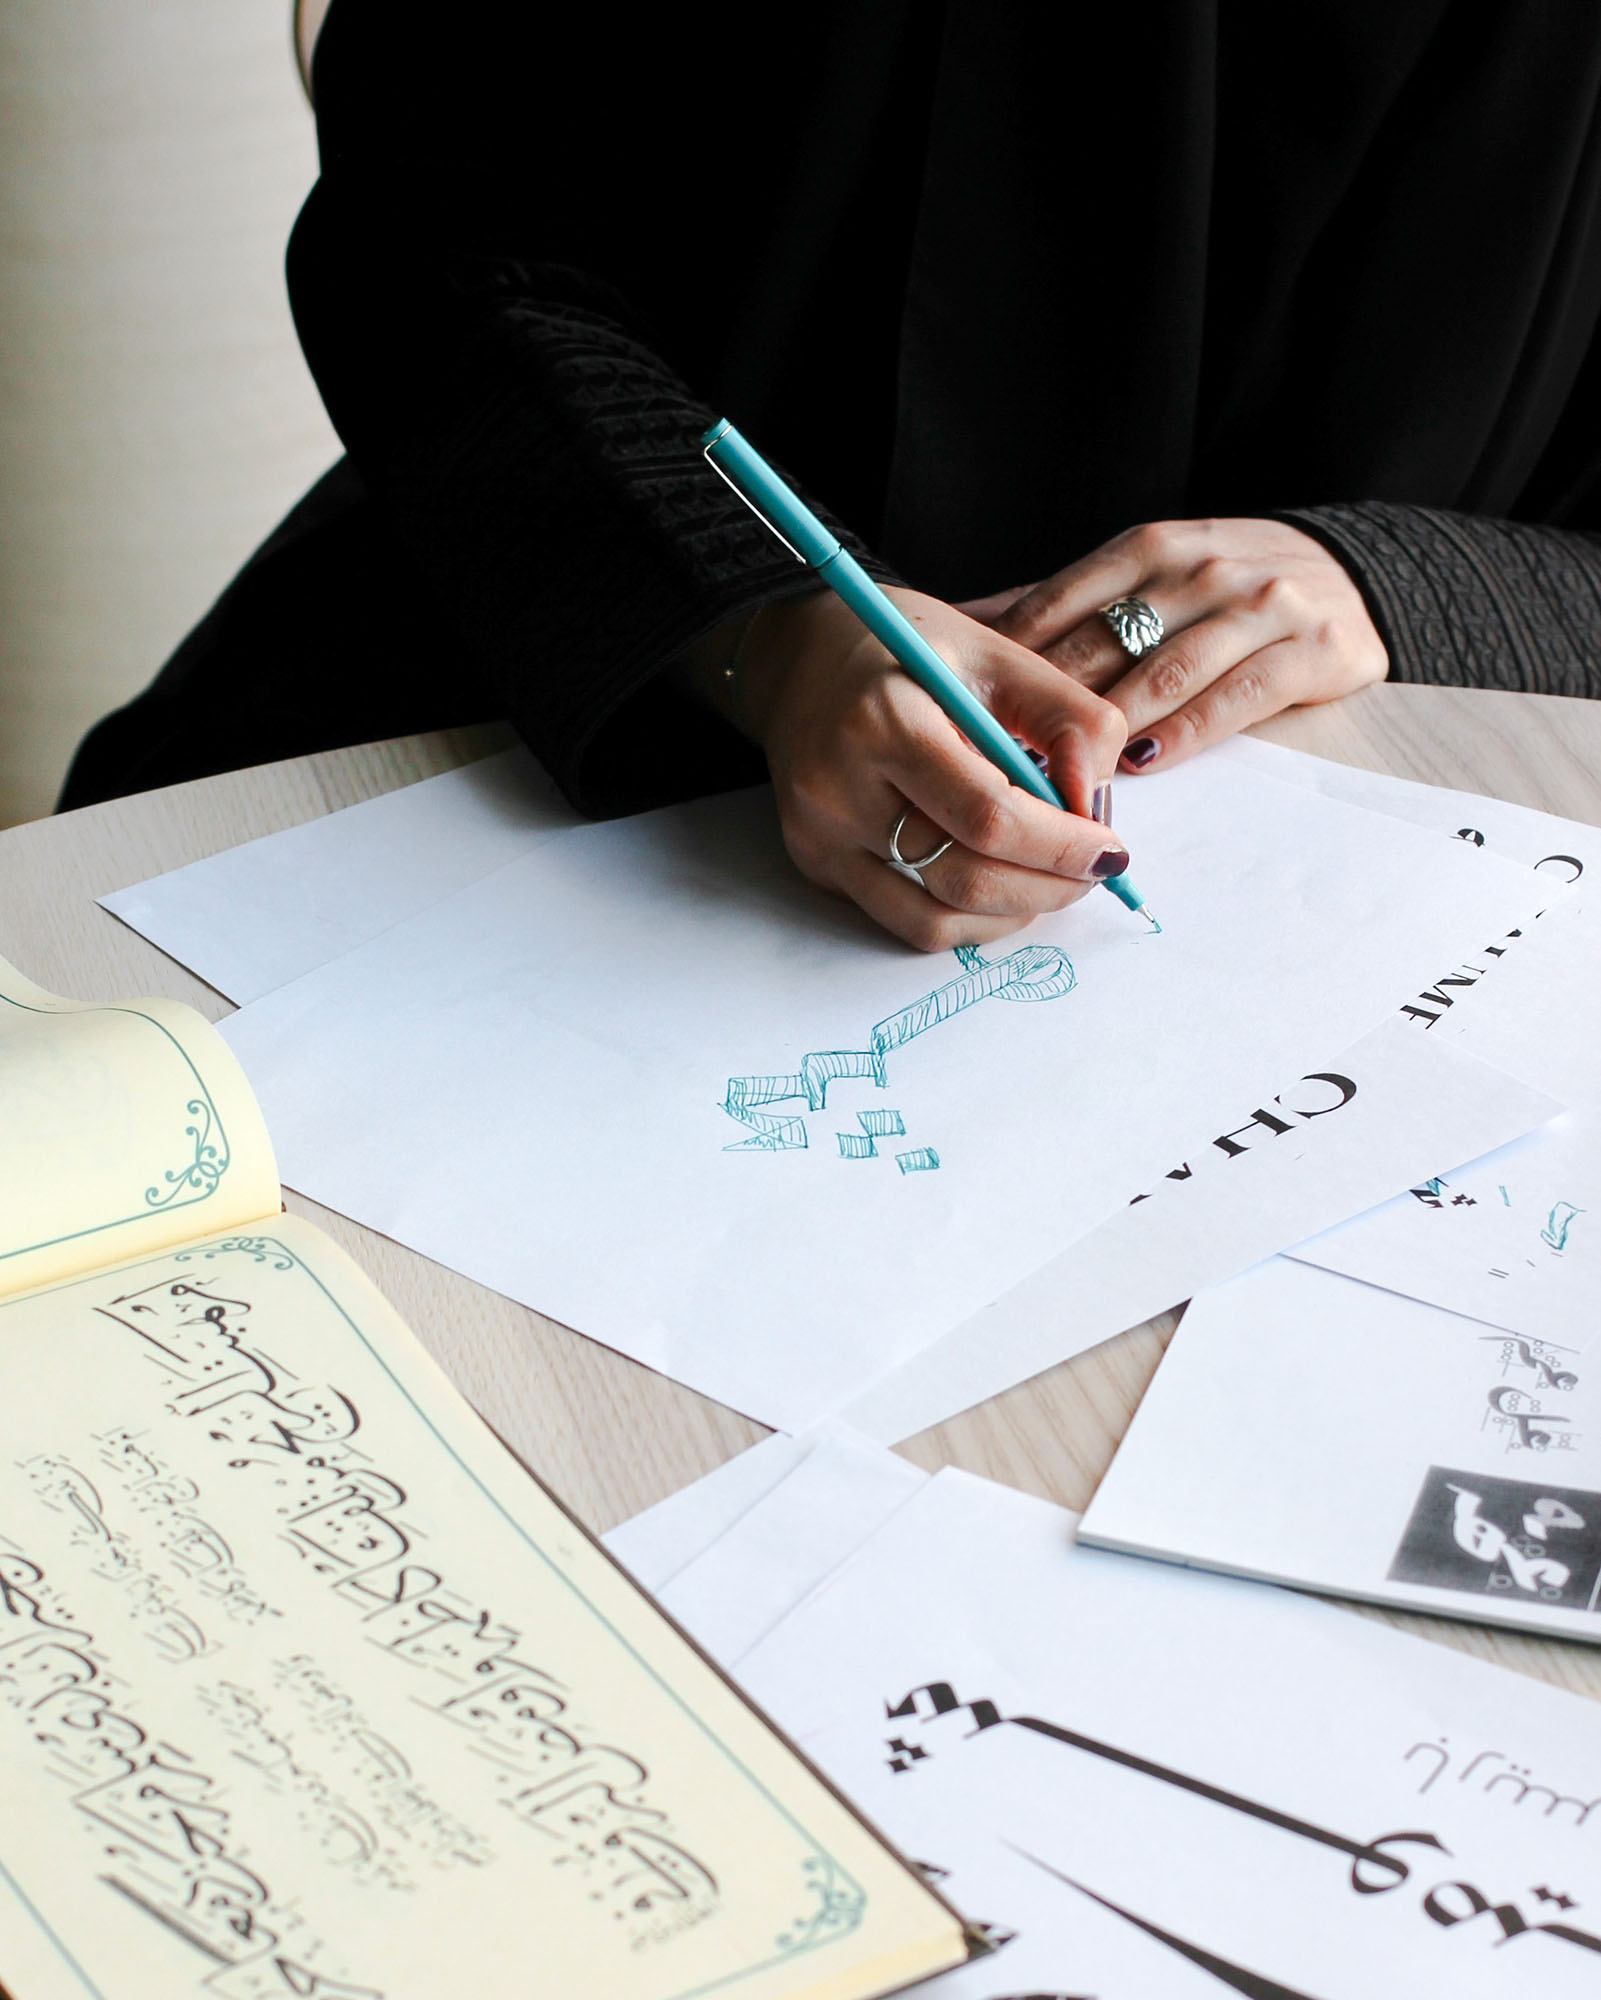 Zainab sketching out ideas on paper for the Chaumet project